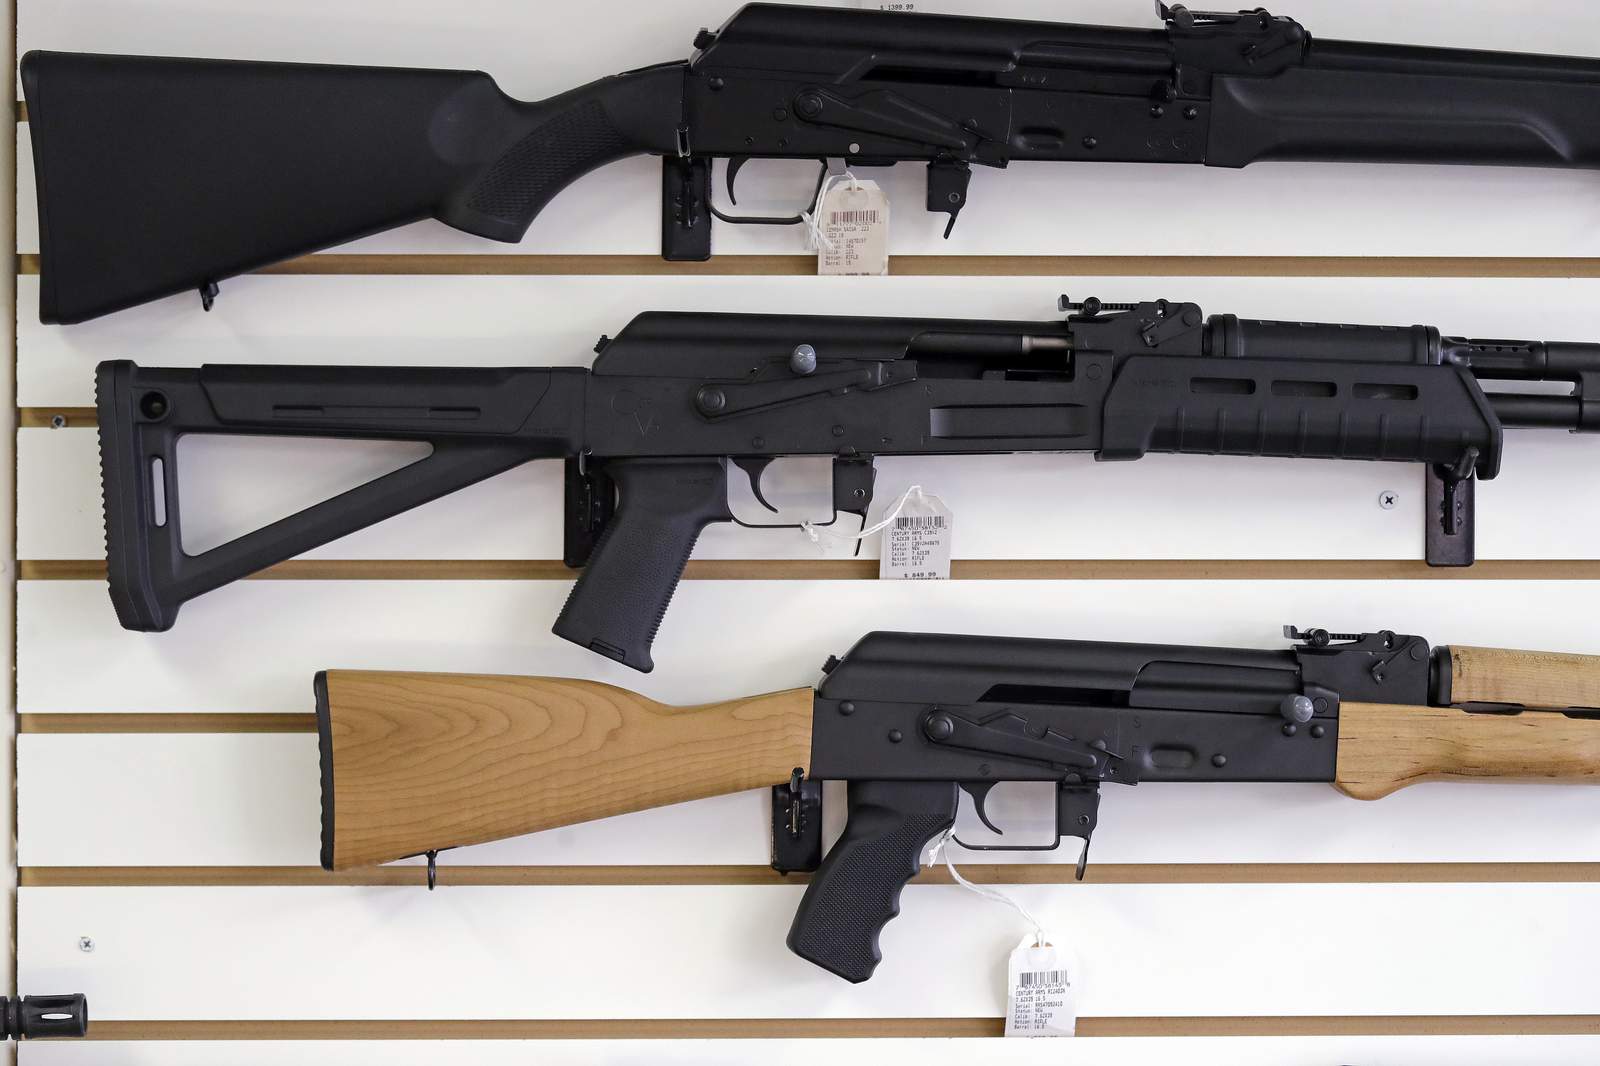 Oregon gun storage law would be among the toughest in the US